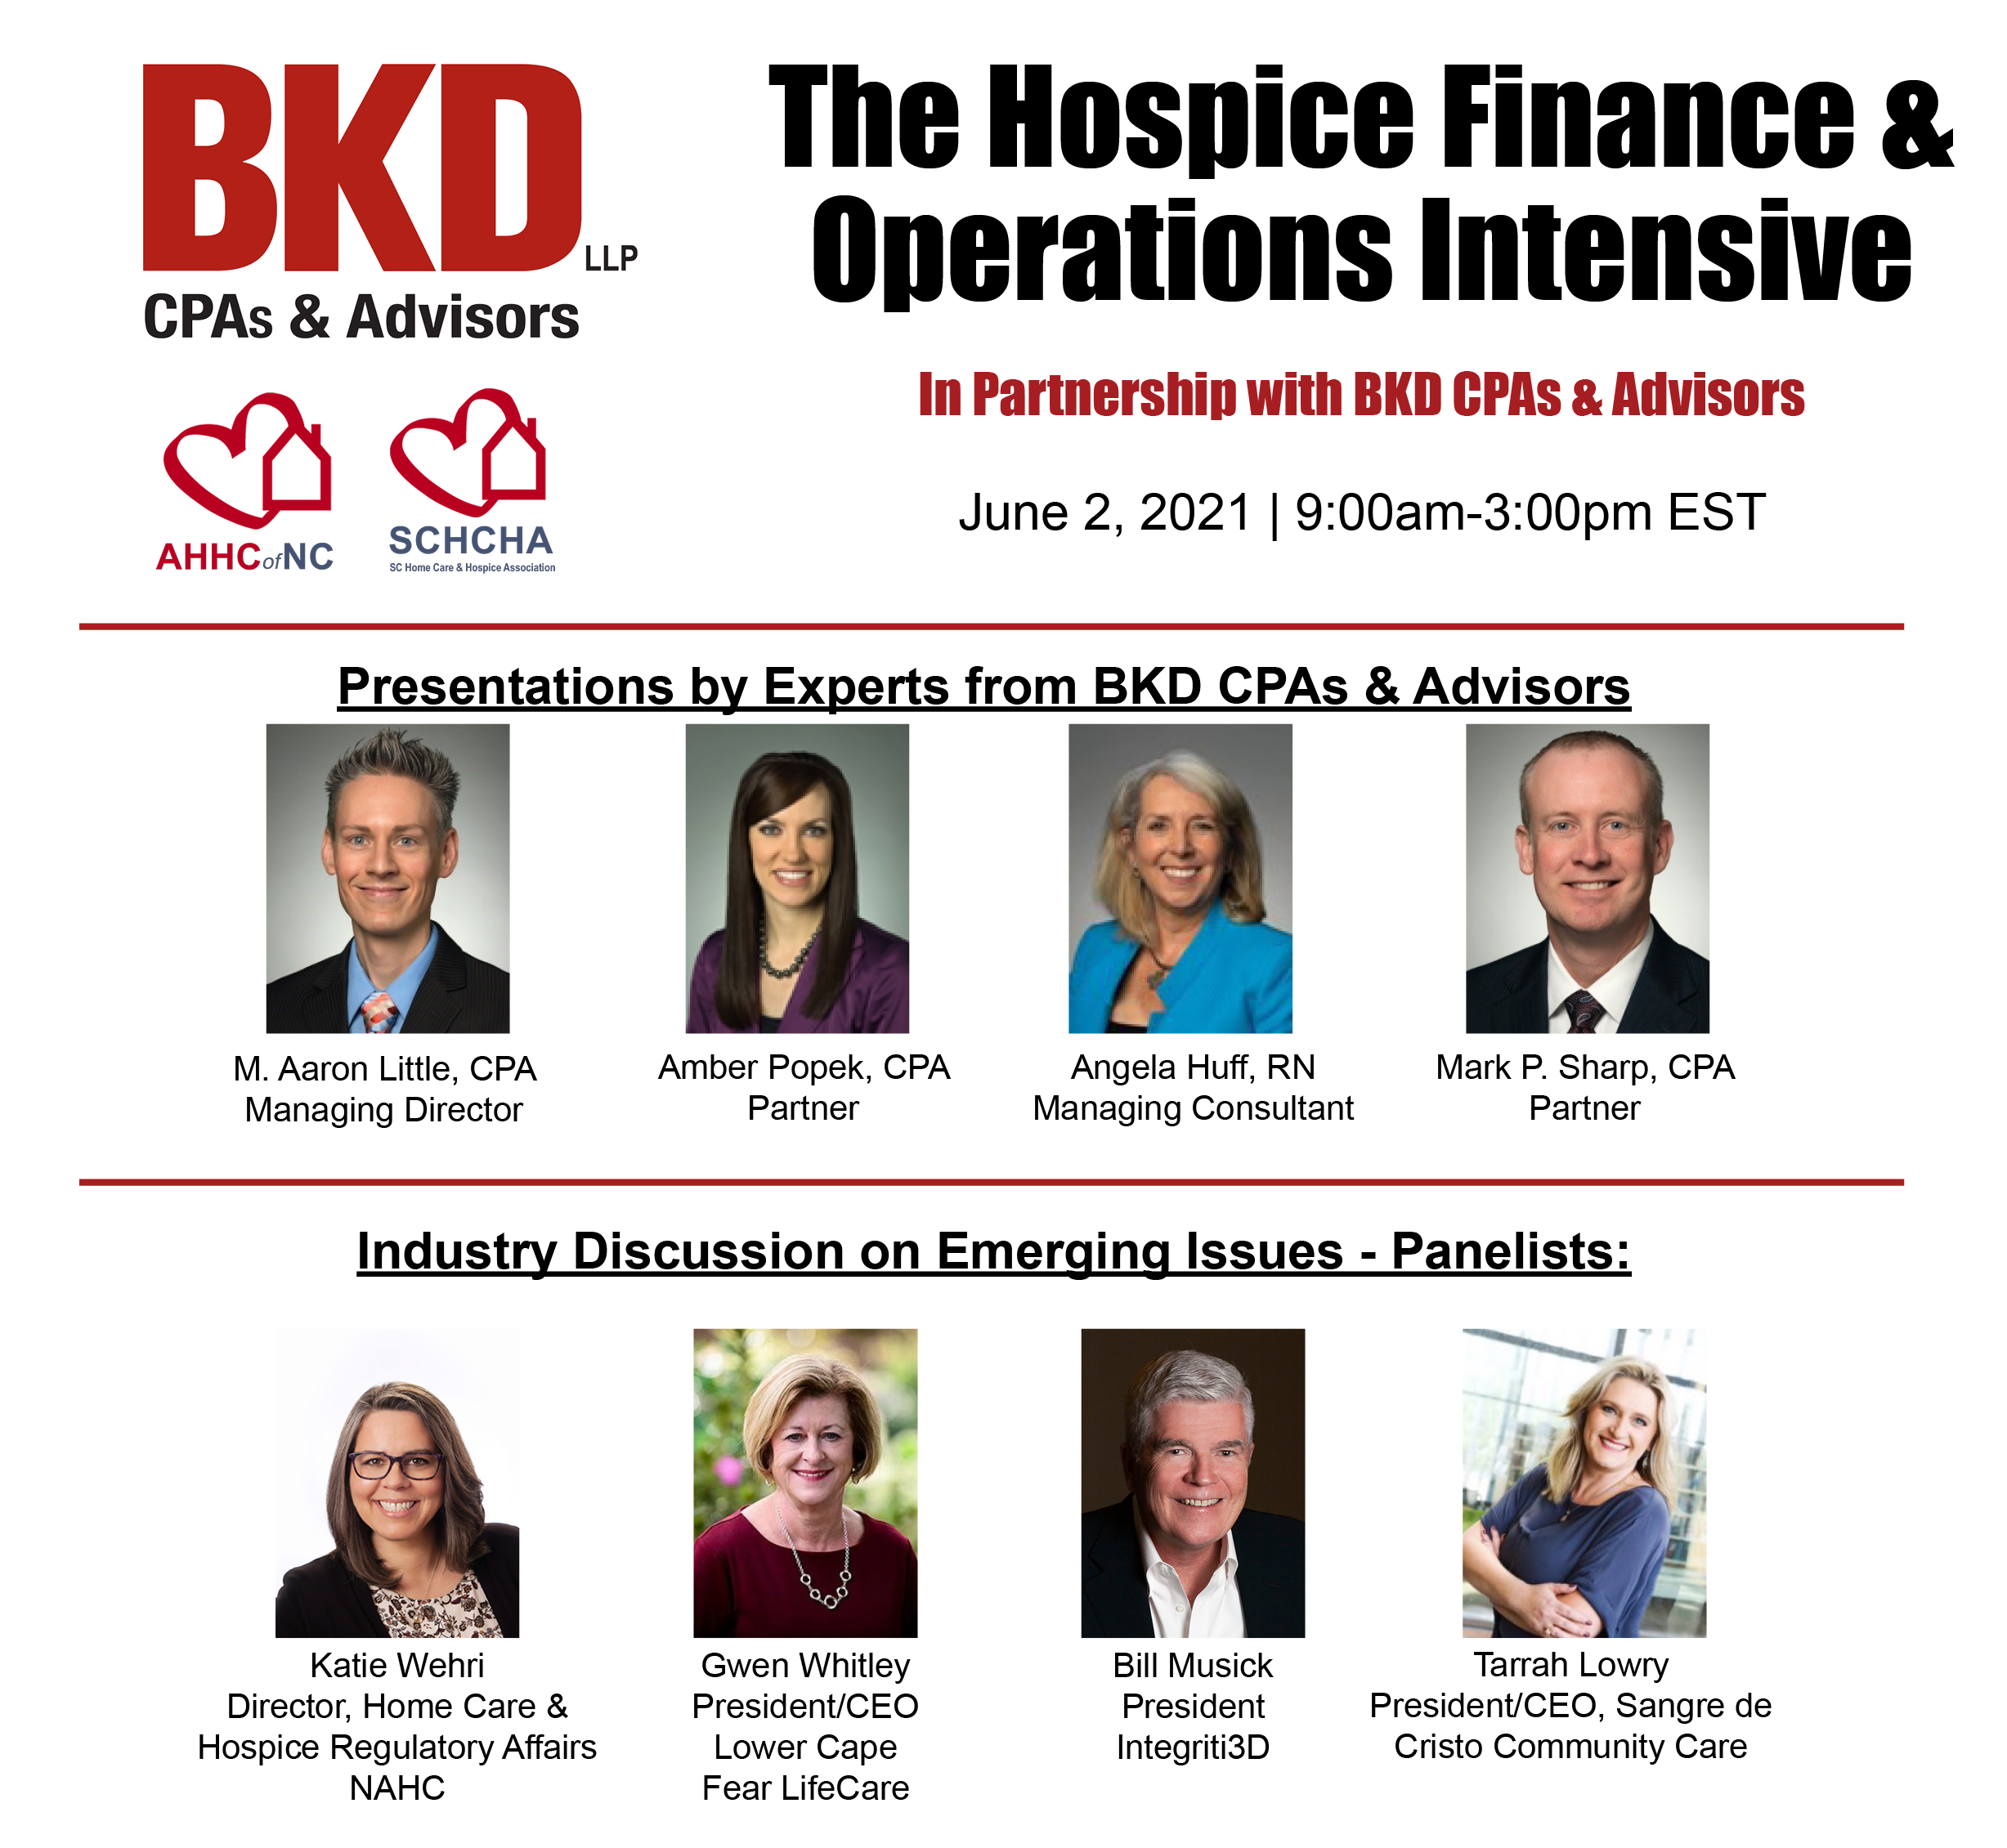 AHHCNC Hospice Financial Intensive Panel